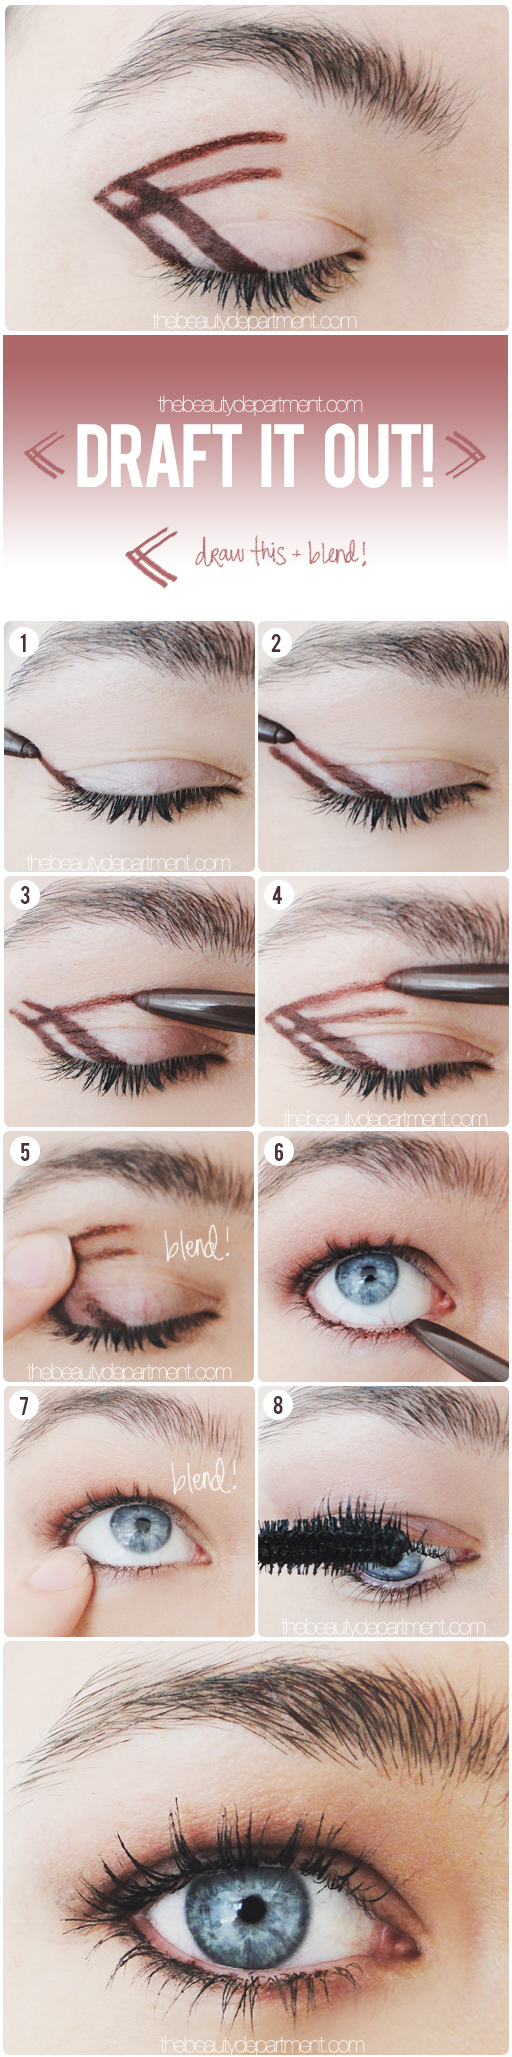 Easy Smokey Eye Makeup The Beauty Department Your Daily Dose Of Pretty Easy Smoky Eye